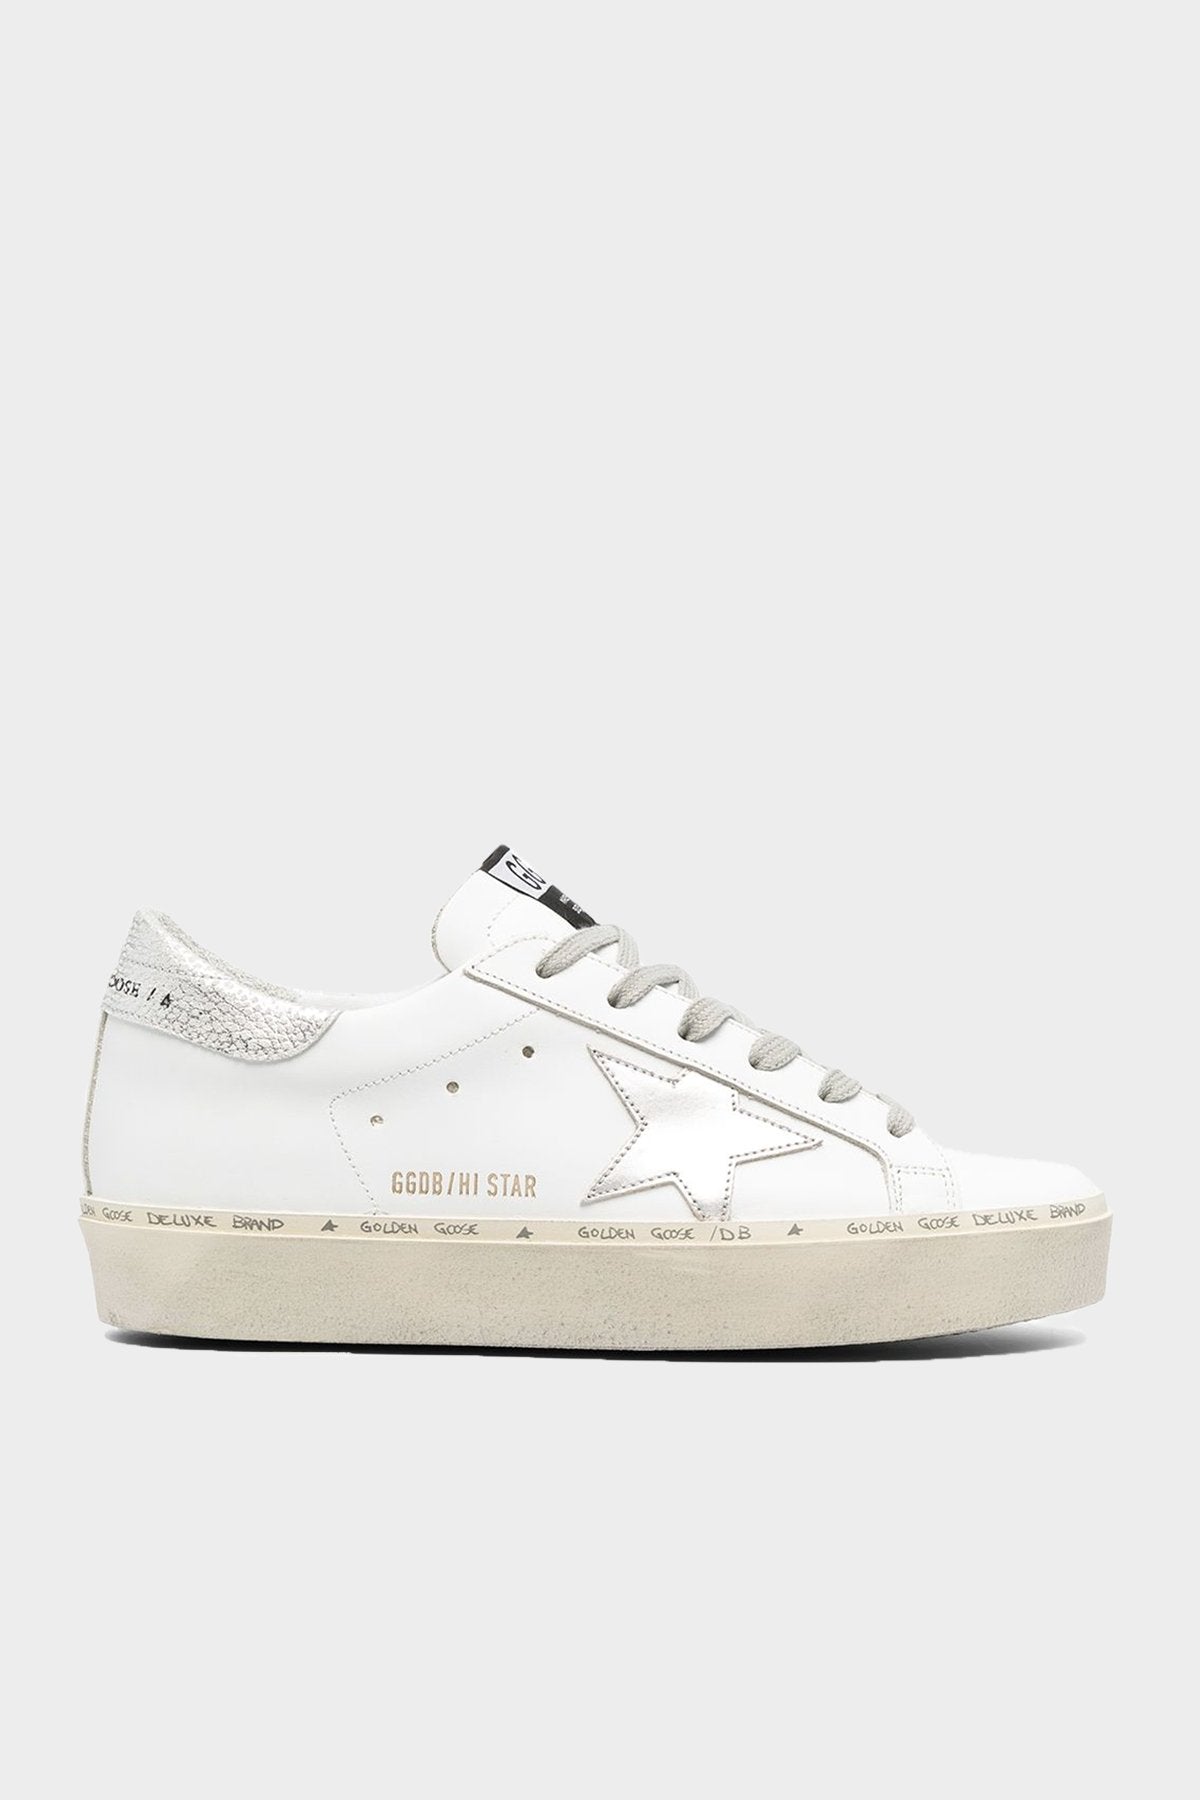 Hi-Star Laminated Star Leather Sneaker in White Silver - shop-olivia.com